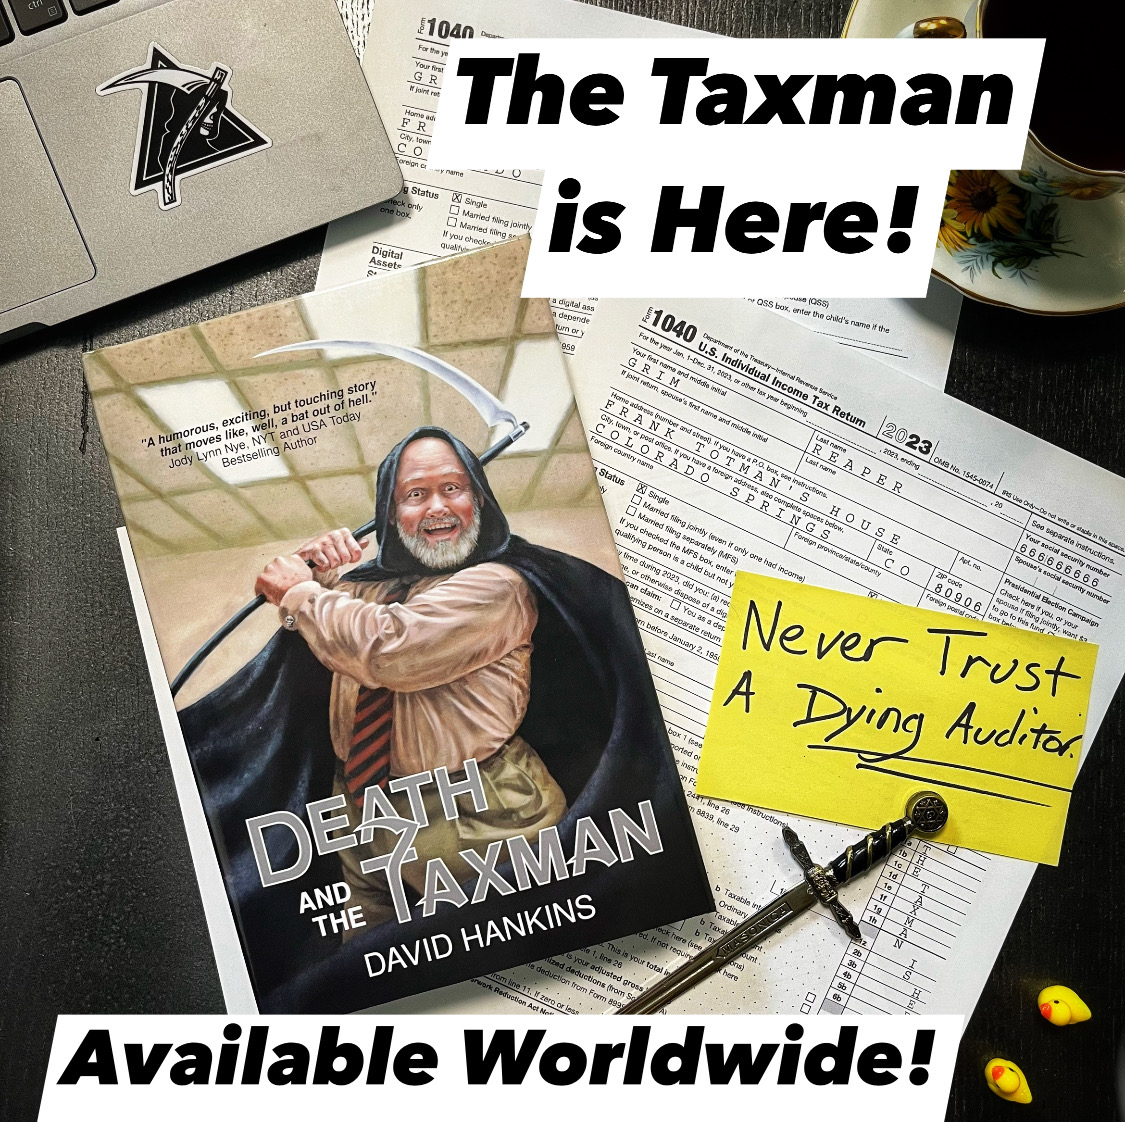 @JordBuxt @sffinsiders Thrilled to have entered #SPFBOX with my new release Death and the Taxman. Fingers crossed!

The Grim Reaper, trapped in an IRS agent's dying body, has to regain his powers before he dies and faces judgment for his original sin.

books2read.com/deathandthetax…

#deathandthetaxman